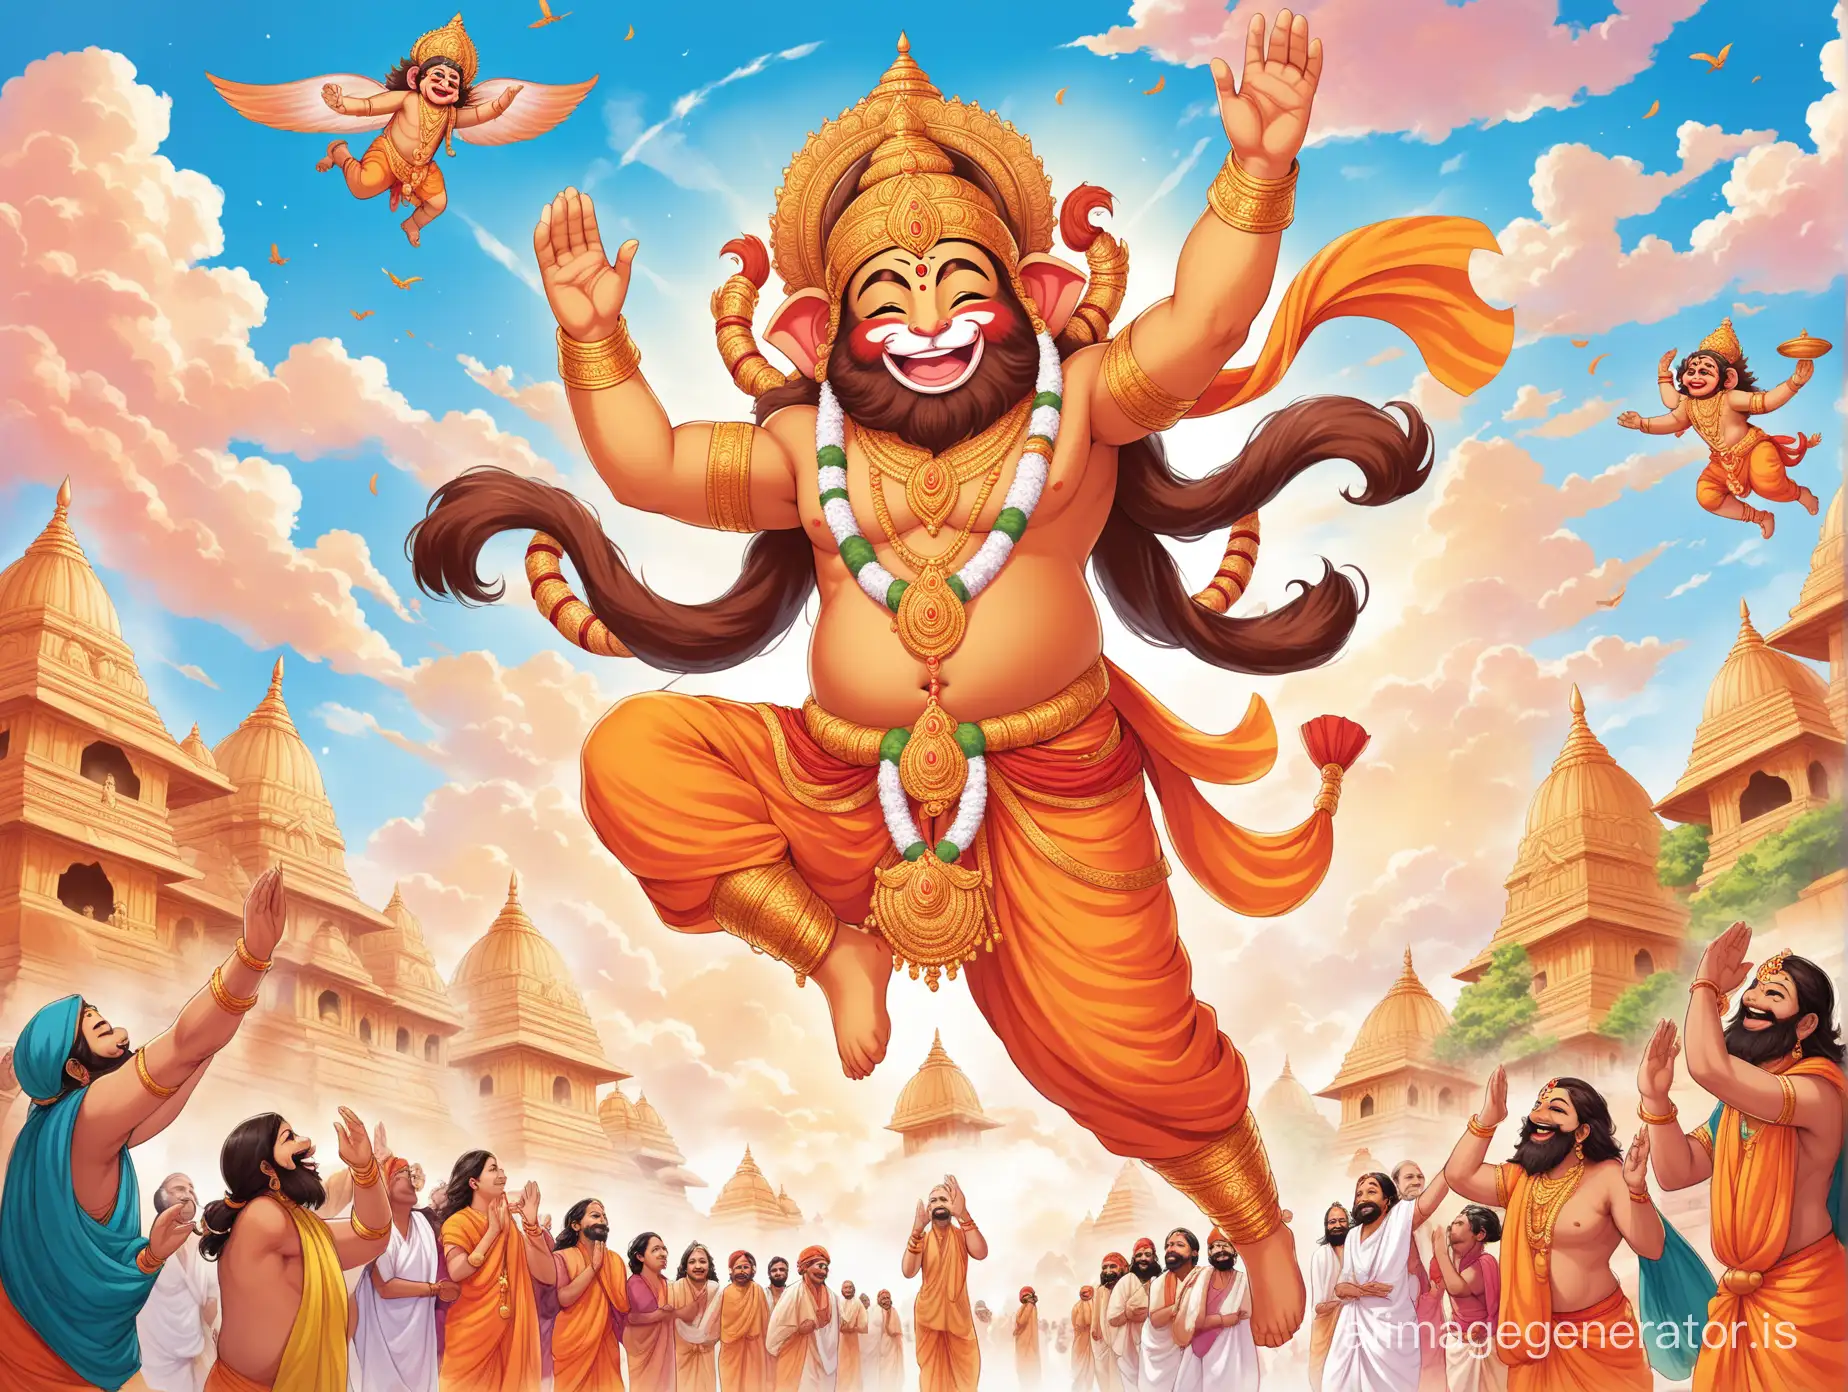 Capture Hanumanji's playful side as he transforms into a giant and flies through the skies, spreading joy and laughter among devotees.